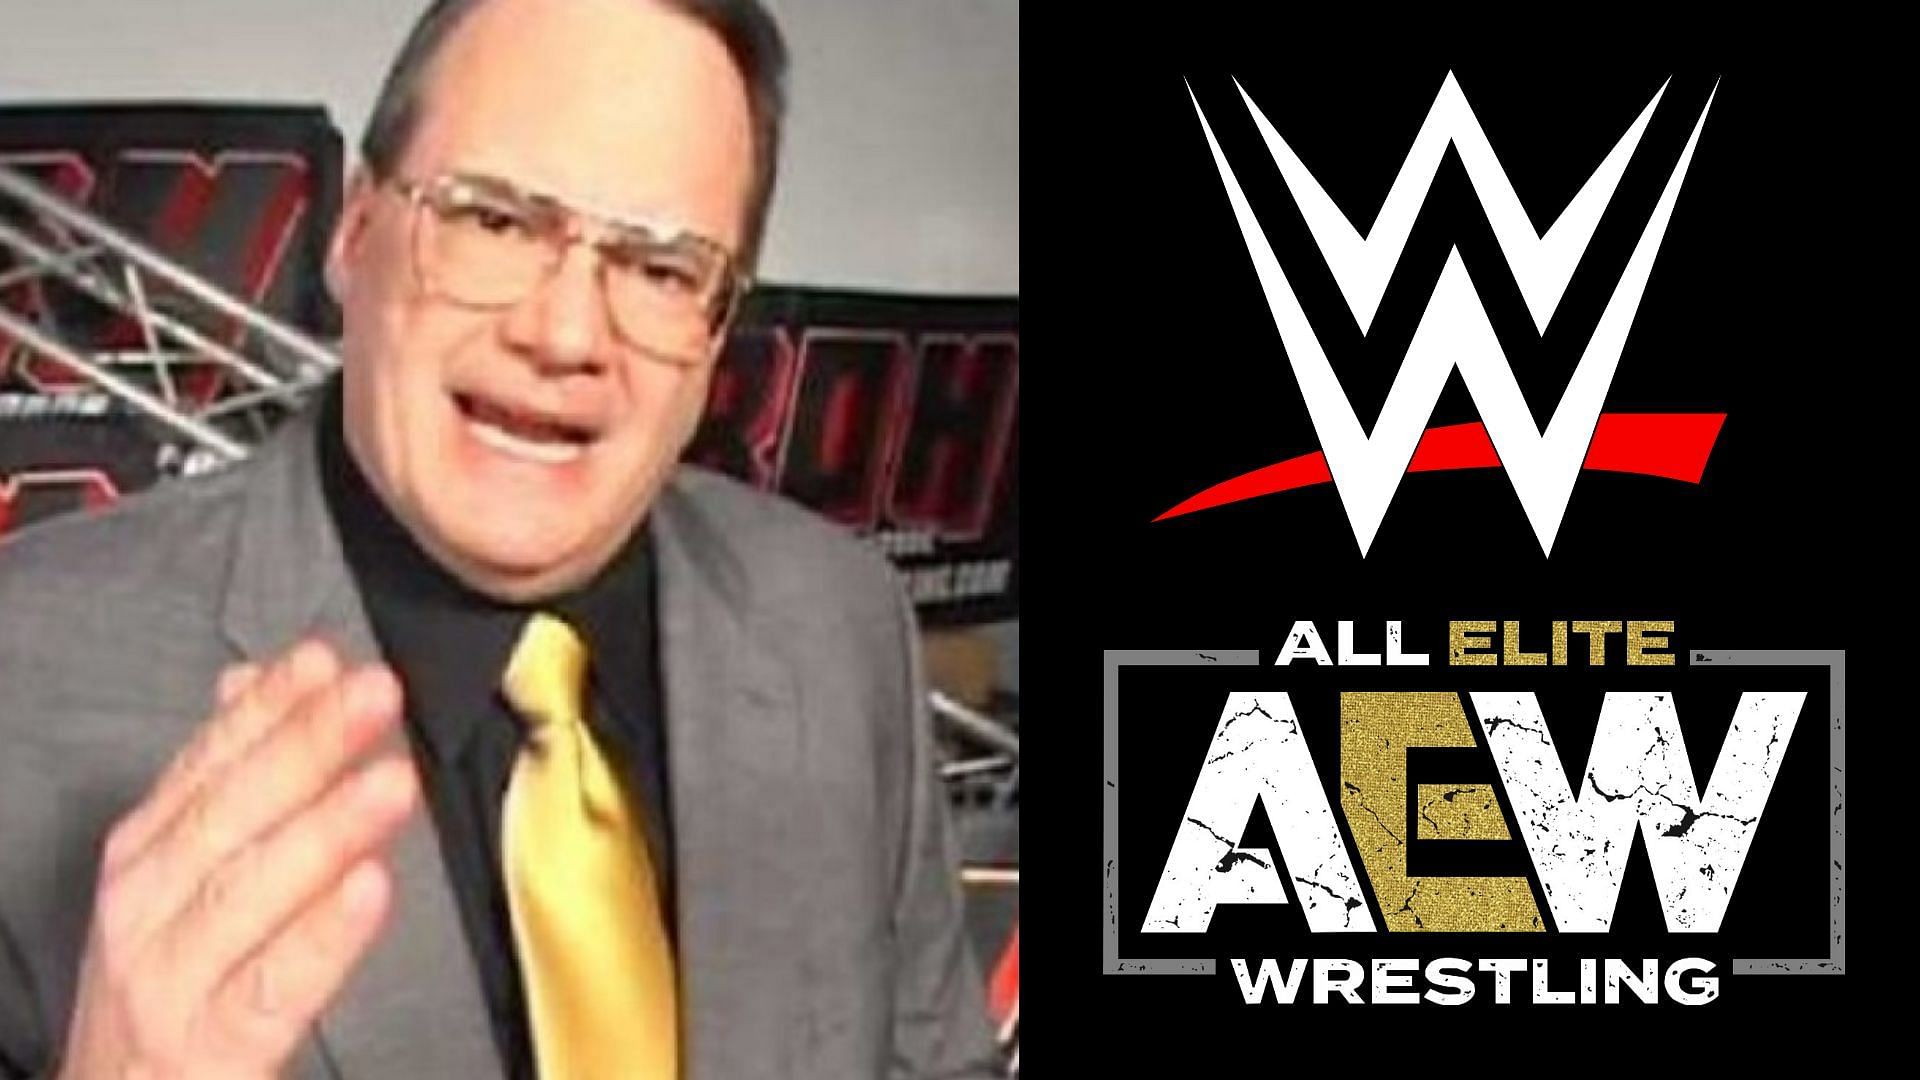 Jim Cornette has always been blunt when it comes to his criticisms about AEW